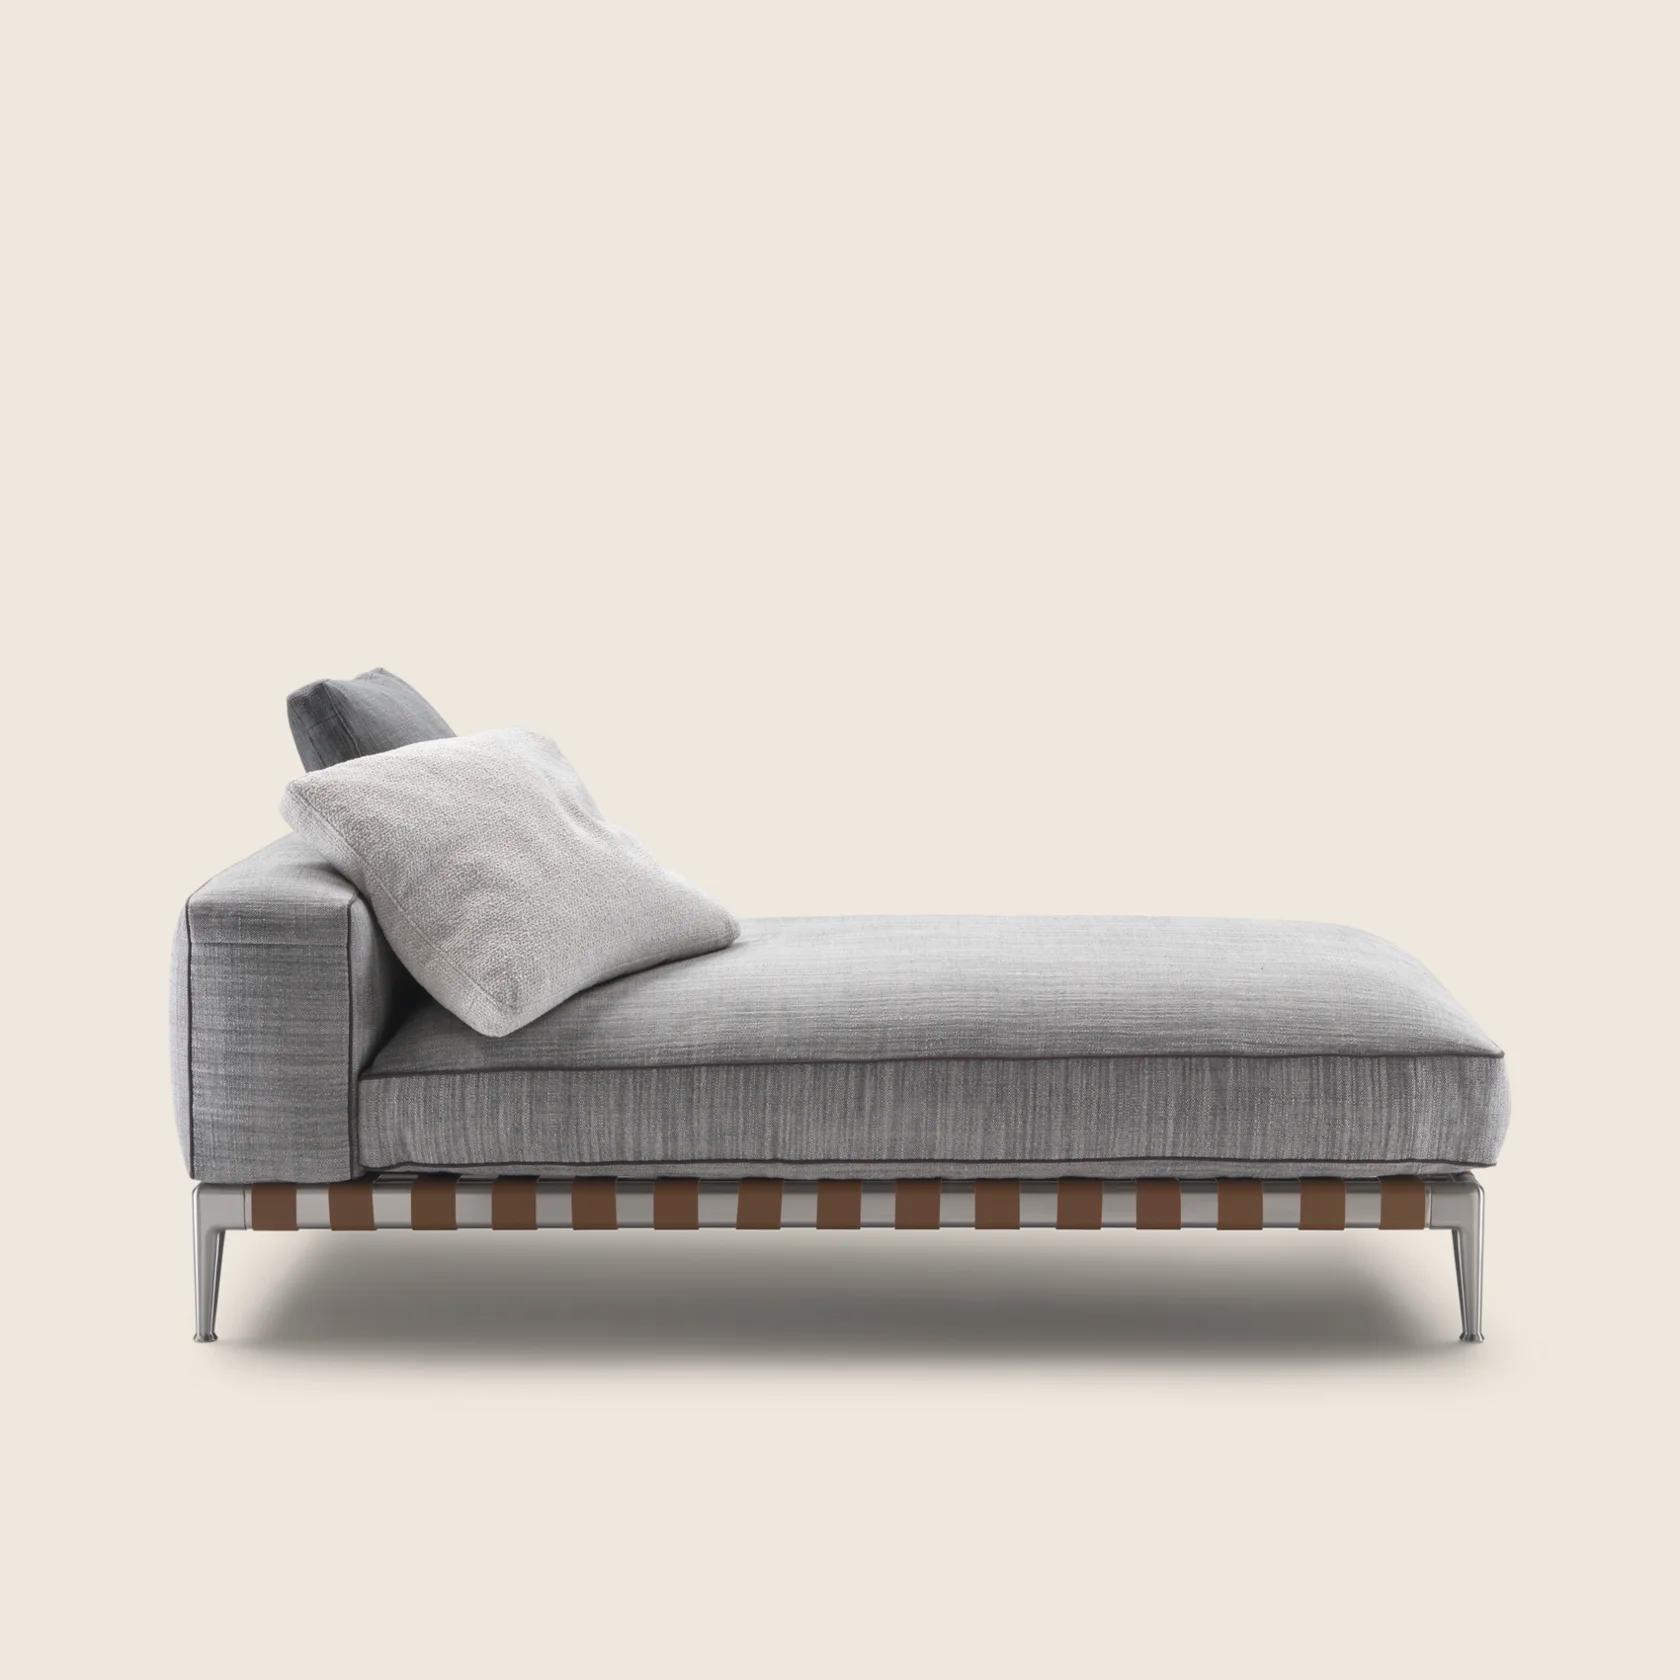 GREGORY XL_CHAISELONGUE__lato_2021.png